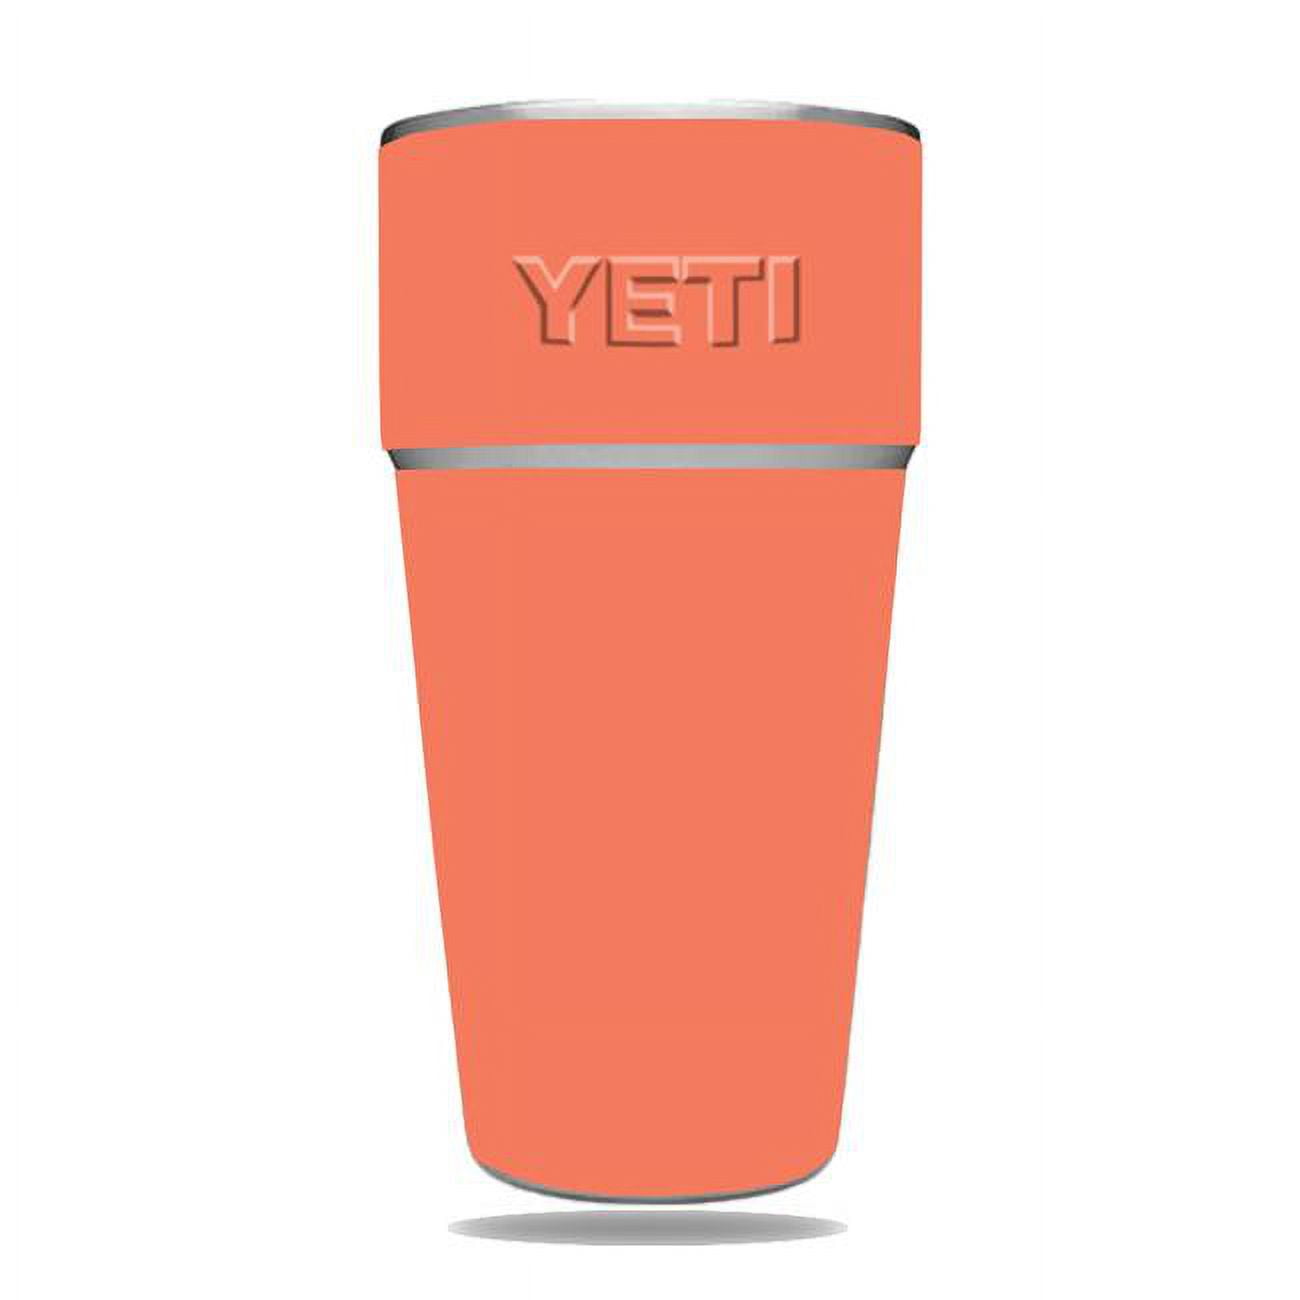 Solid Hot Pink Skin For Yeti 20 qt Cooler — MightySkins